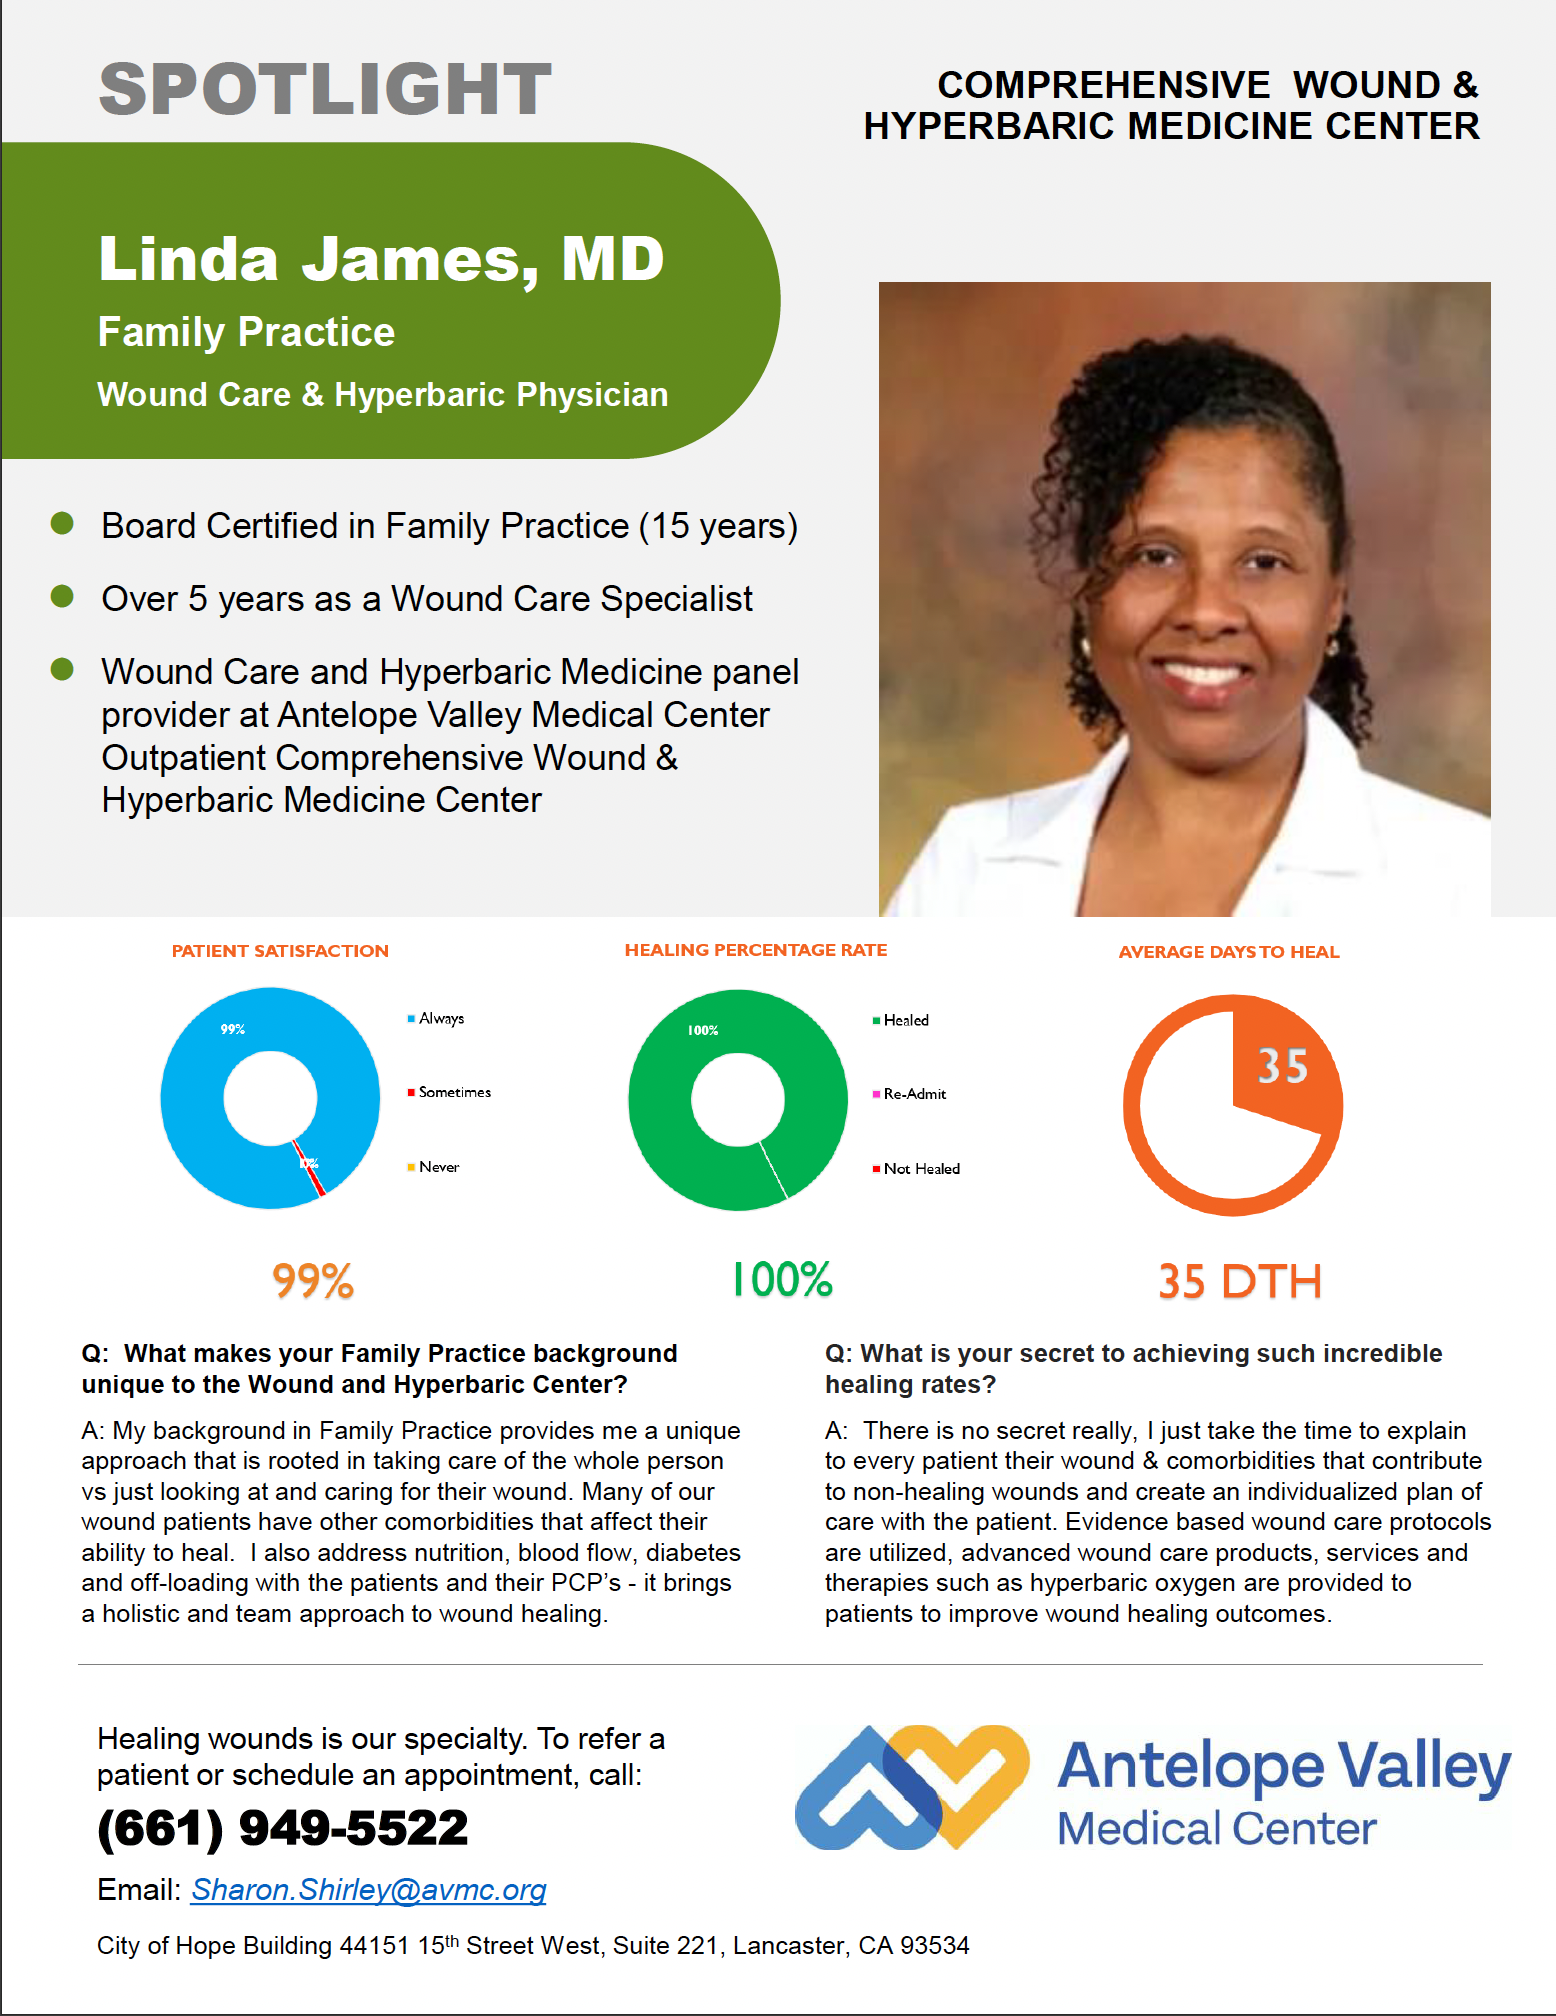 Physician spotlight flyer showcasing Linda James, MD with donut graphs outlying a ninety-nine percent patient satisfaction rate, a one-hundred percent healing rate of always and a thirty-five day average days to heal rate when treated by this physician. 